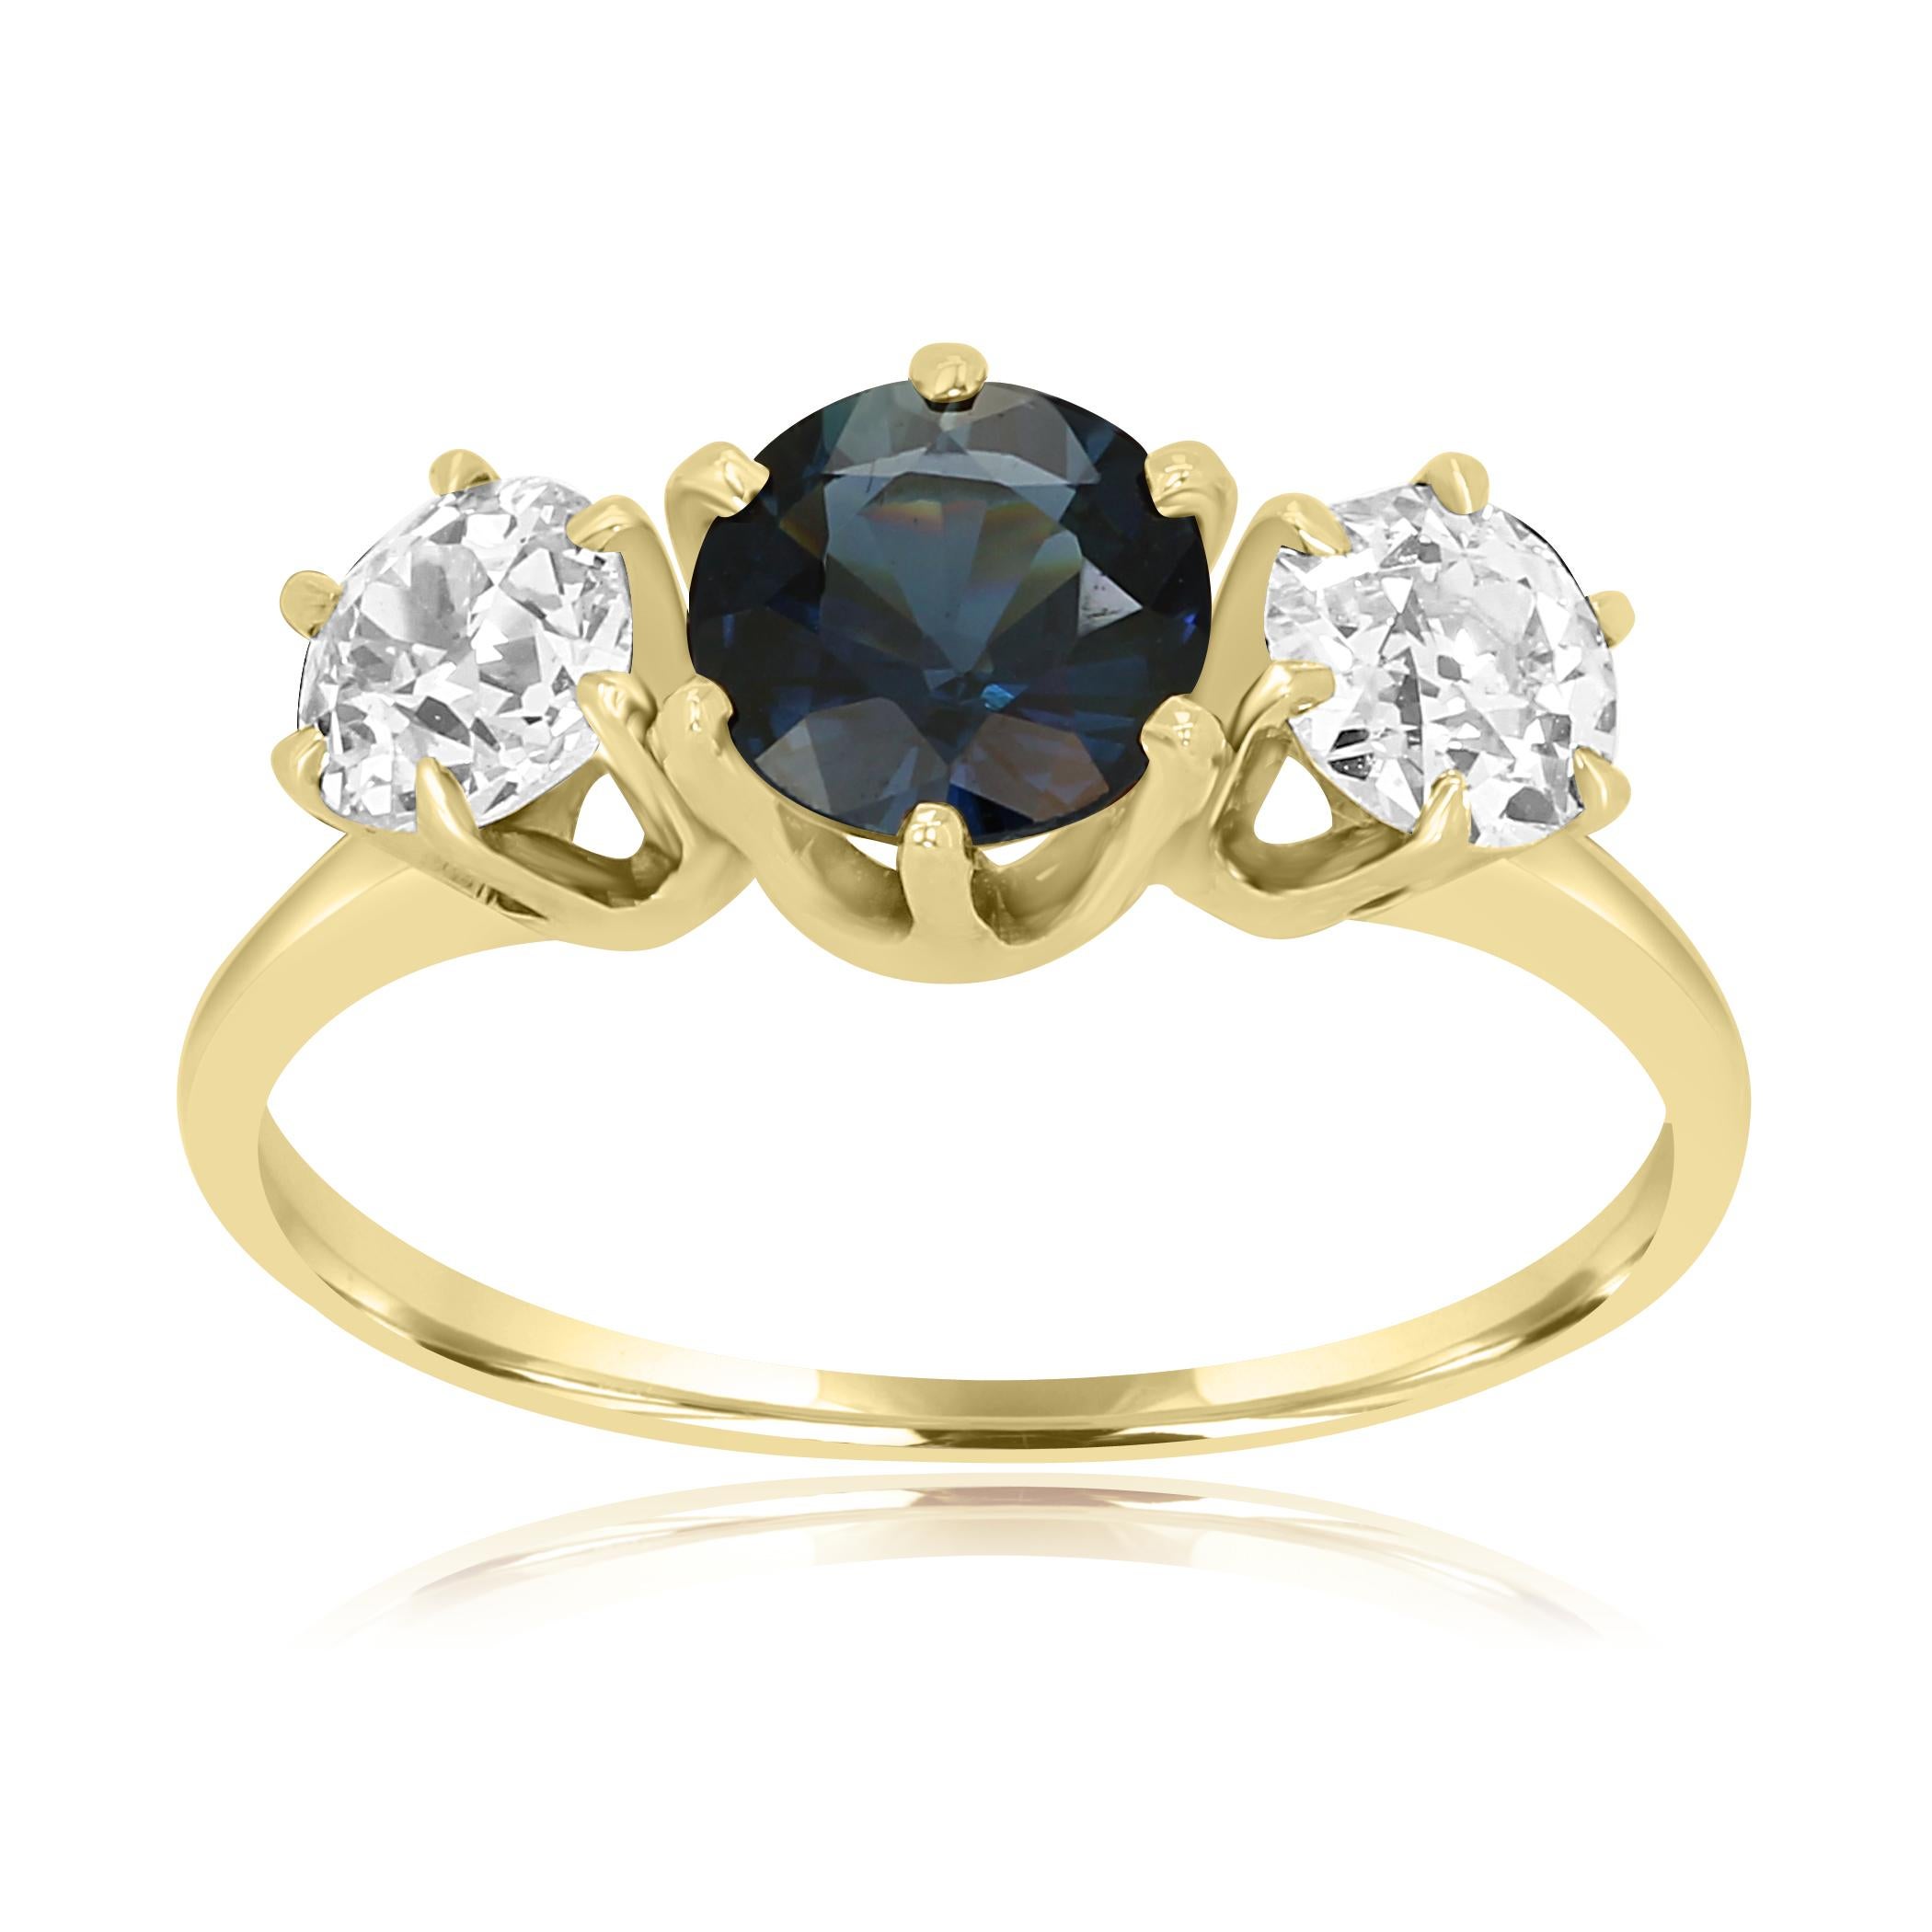 Gorgeous Blue Sapphire Round 1.50 Carats Flanked With 2 White Old European Cut VS-SI Clarity Diamonds 1.10 Carat on the side in 14K Yellow Gold Classic Ring.

MADE IN USA
Center Blue Sapphire Round Weight 1.50 Carat
Total Weight 2.60 Carat